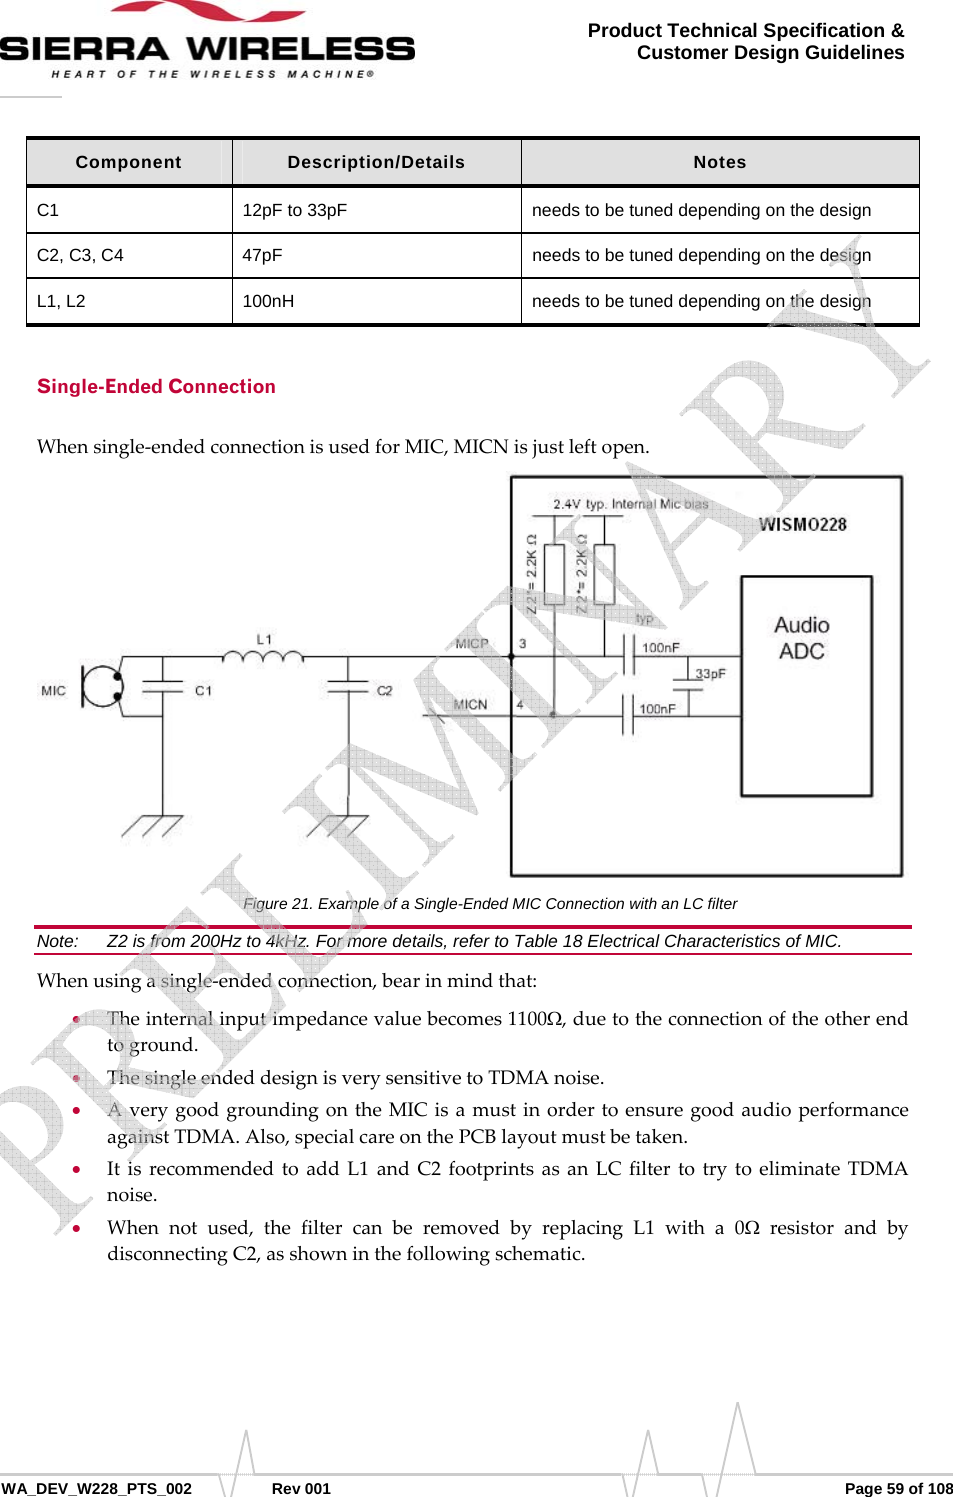      WA_DEV_W228_PTS_002 Rev 001  Page 59 of 108 Product Technical Specification &amp; Customer Design Guidelines Component  Description/Details  Notes C1  12pF to 33pF  needs to be tuned depending on the design C2, C3, C4  47pF  needs to be tuned depending on the design L1, L2  100nH  needs to be tuned depending on the design Single-Ended Connection Whensingle‐endedconnectionisusedforMIC,MICNisjustleftopen.Figure 21. Example of a Single-Ended MIC Connection with an LC filter Note:   Z2 is from 200Hz to 4kHz. For more details, refer to Table 18 Electrical Characteristics of MIC. Whenusingasingle‐endedconnection,bearinmindthat:• Theinternalinputimpedancevaluebecomes1100Ω,duetotheconnectionoftheotherendtoground.• ThesingleendeddesignisverysensitivetoTDMAnoise.• AverygoodgroundingontheMICisamustinordertoensuregoodaudioperformanceagainstTDMA.Also,specialcareonthePCBlayoutmustbetaken.• ItisrecommendedtoaddL1andC2footprintsasanLCfiltertotrytoeliminateTDMAnoise.• Whennotused,thefiltercanberemovedbyreplacingL1witha0ΩresistorandbydisconnectingC2,asshowninthefollowingschematic.   